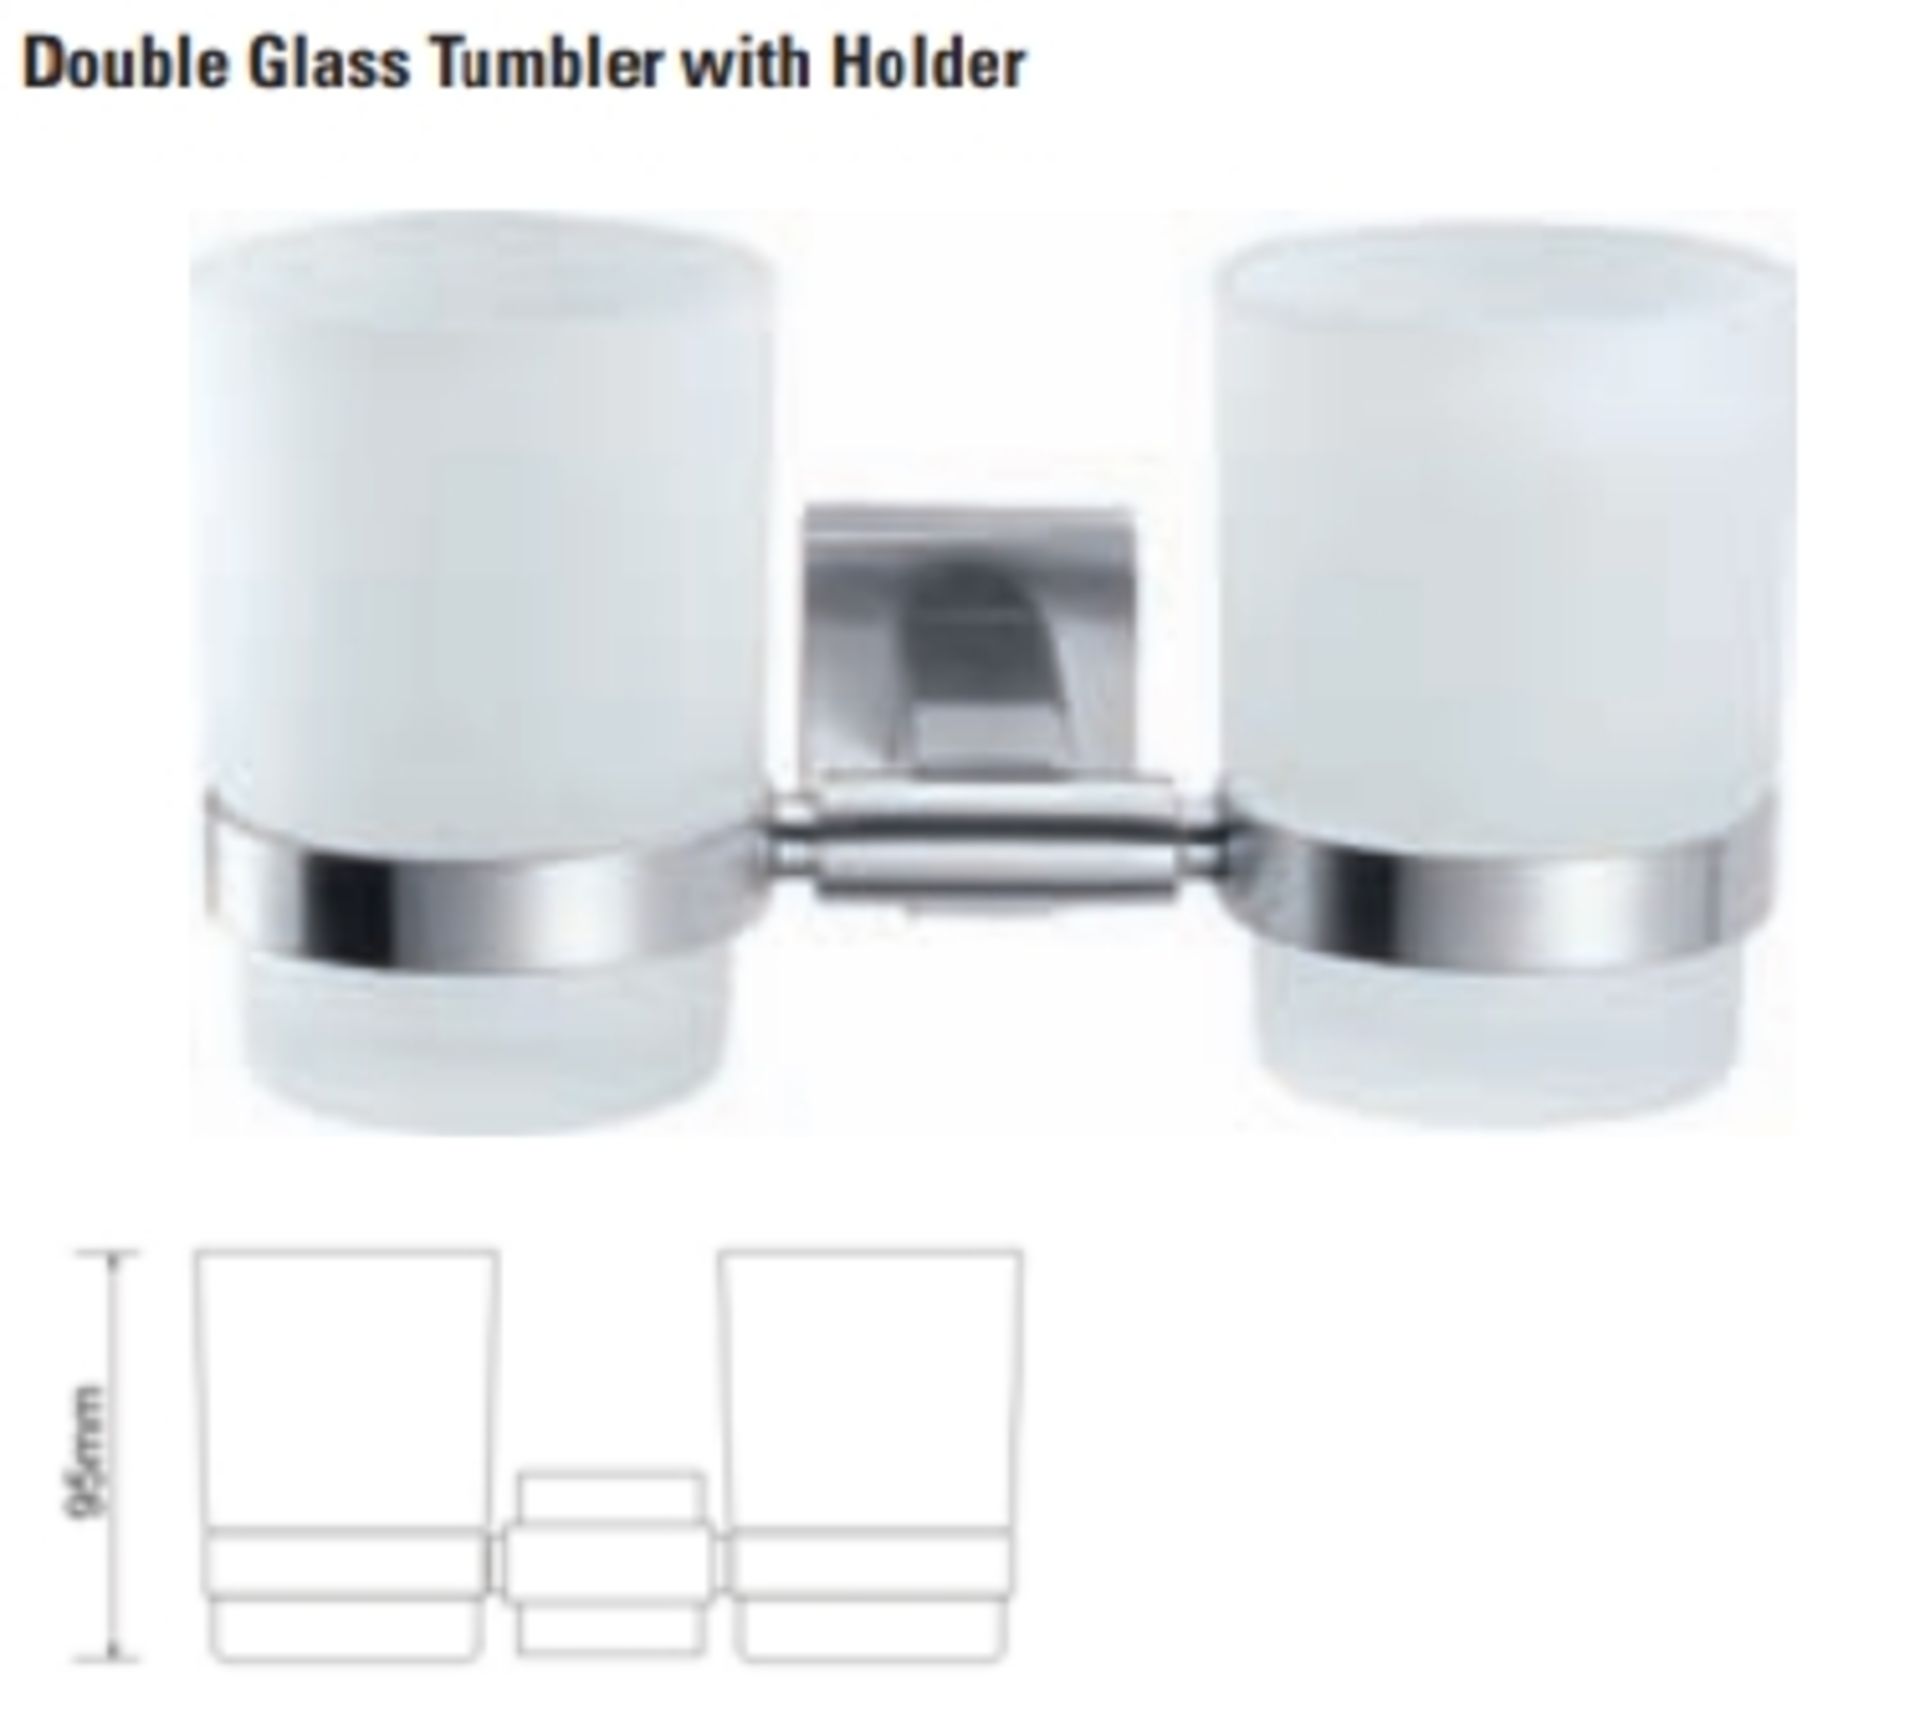 1 x Stonearth Double Frosted Glass Tumbler With Holder - Solid Stainless Steel Bathroom - Image 2 of 3